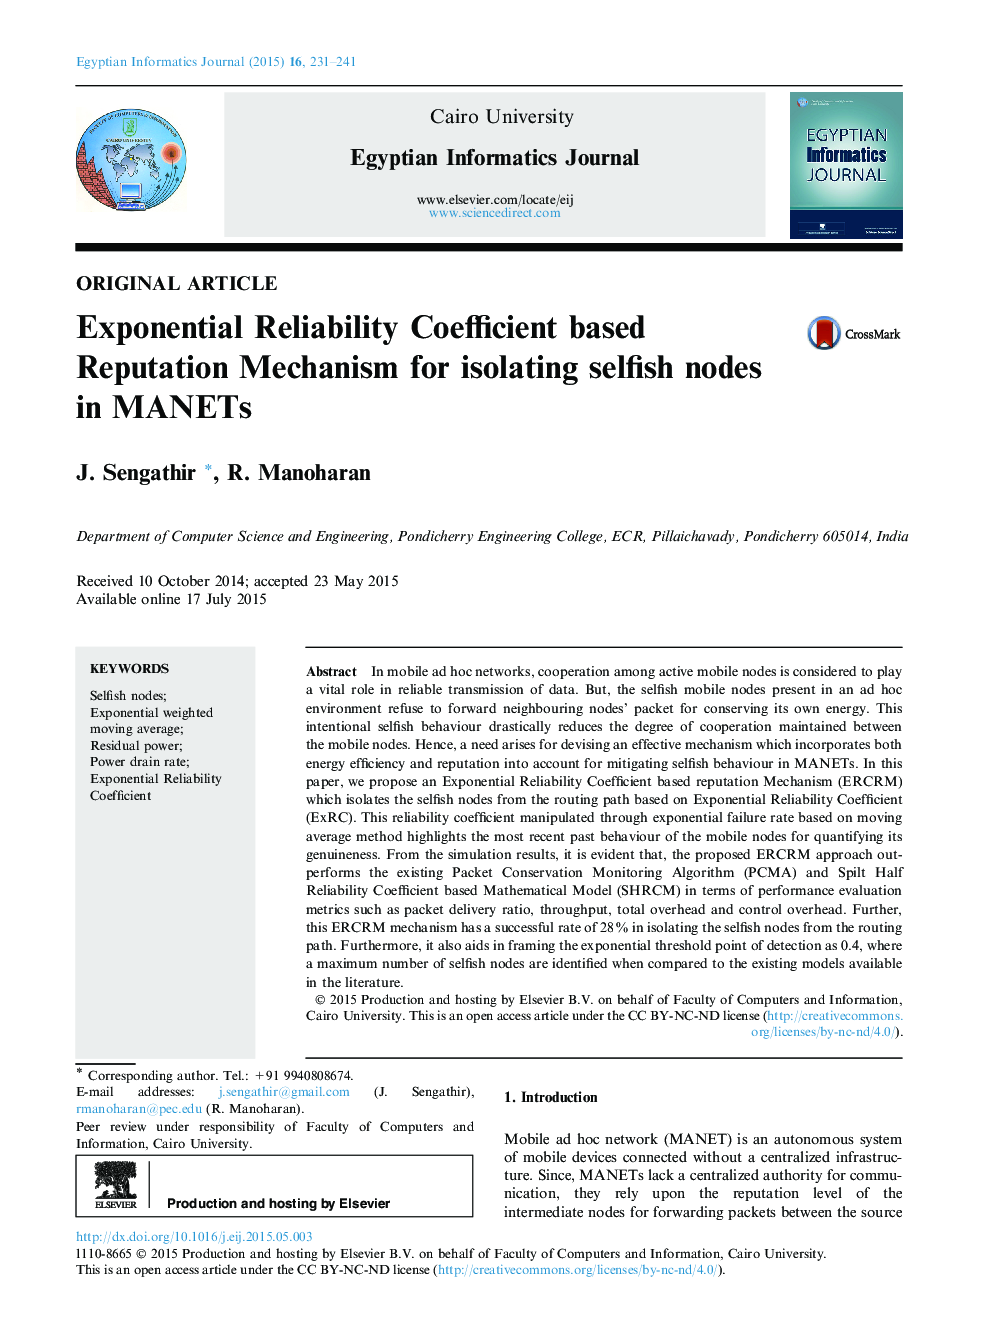 Exponential Reliability Coefficient based Reputation Mechanism for isolating selfish nodes in MANETs 